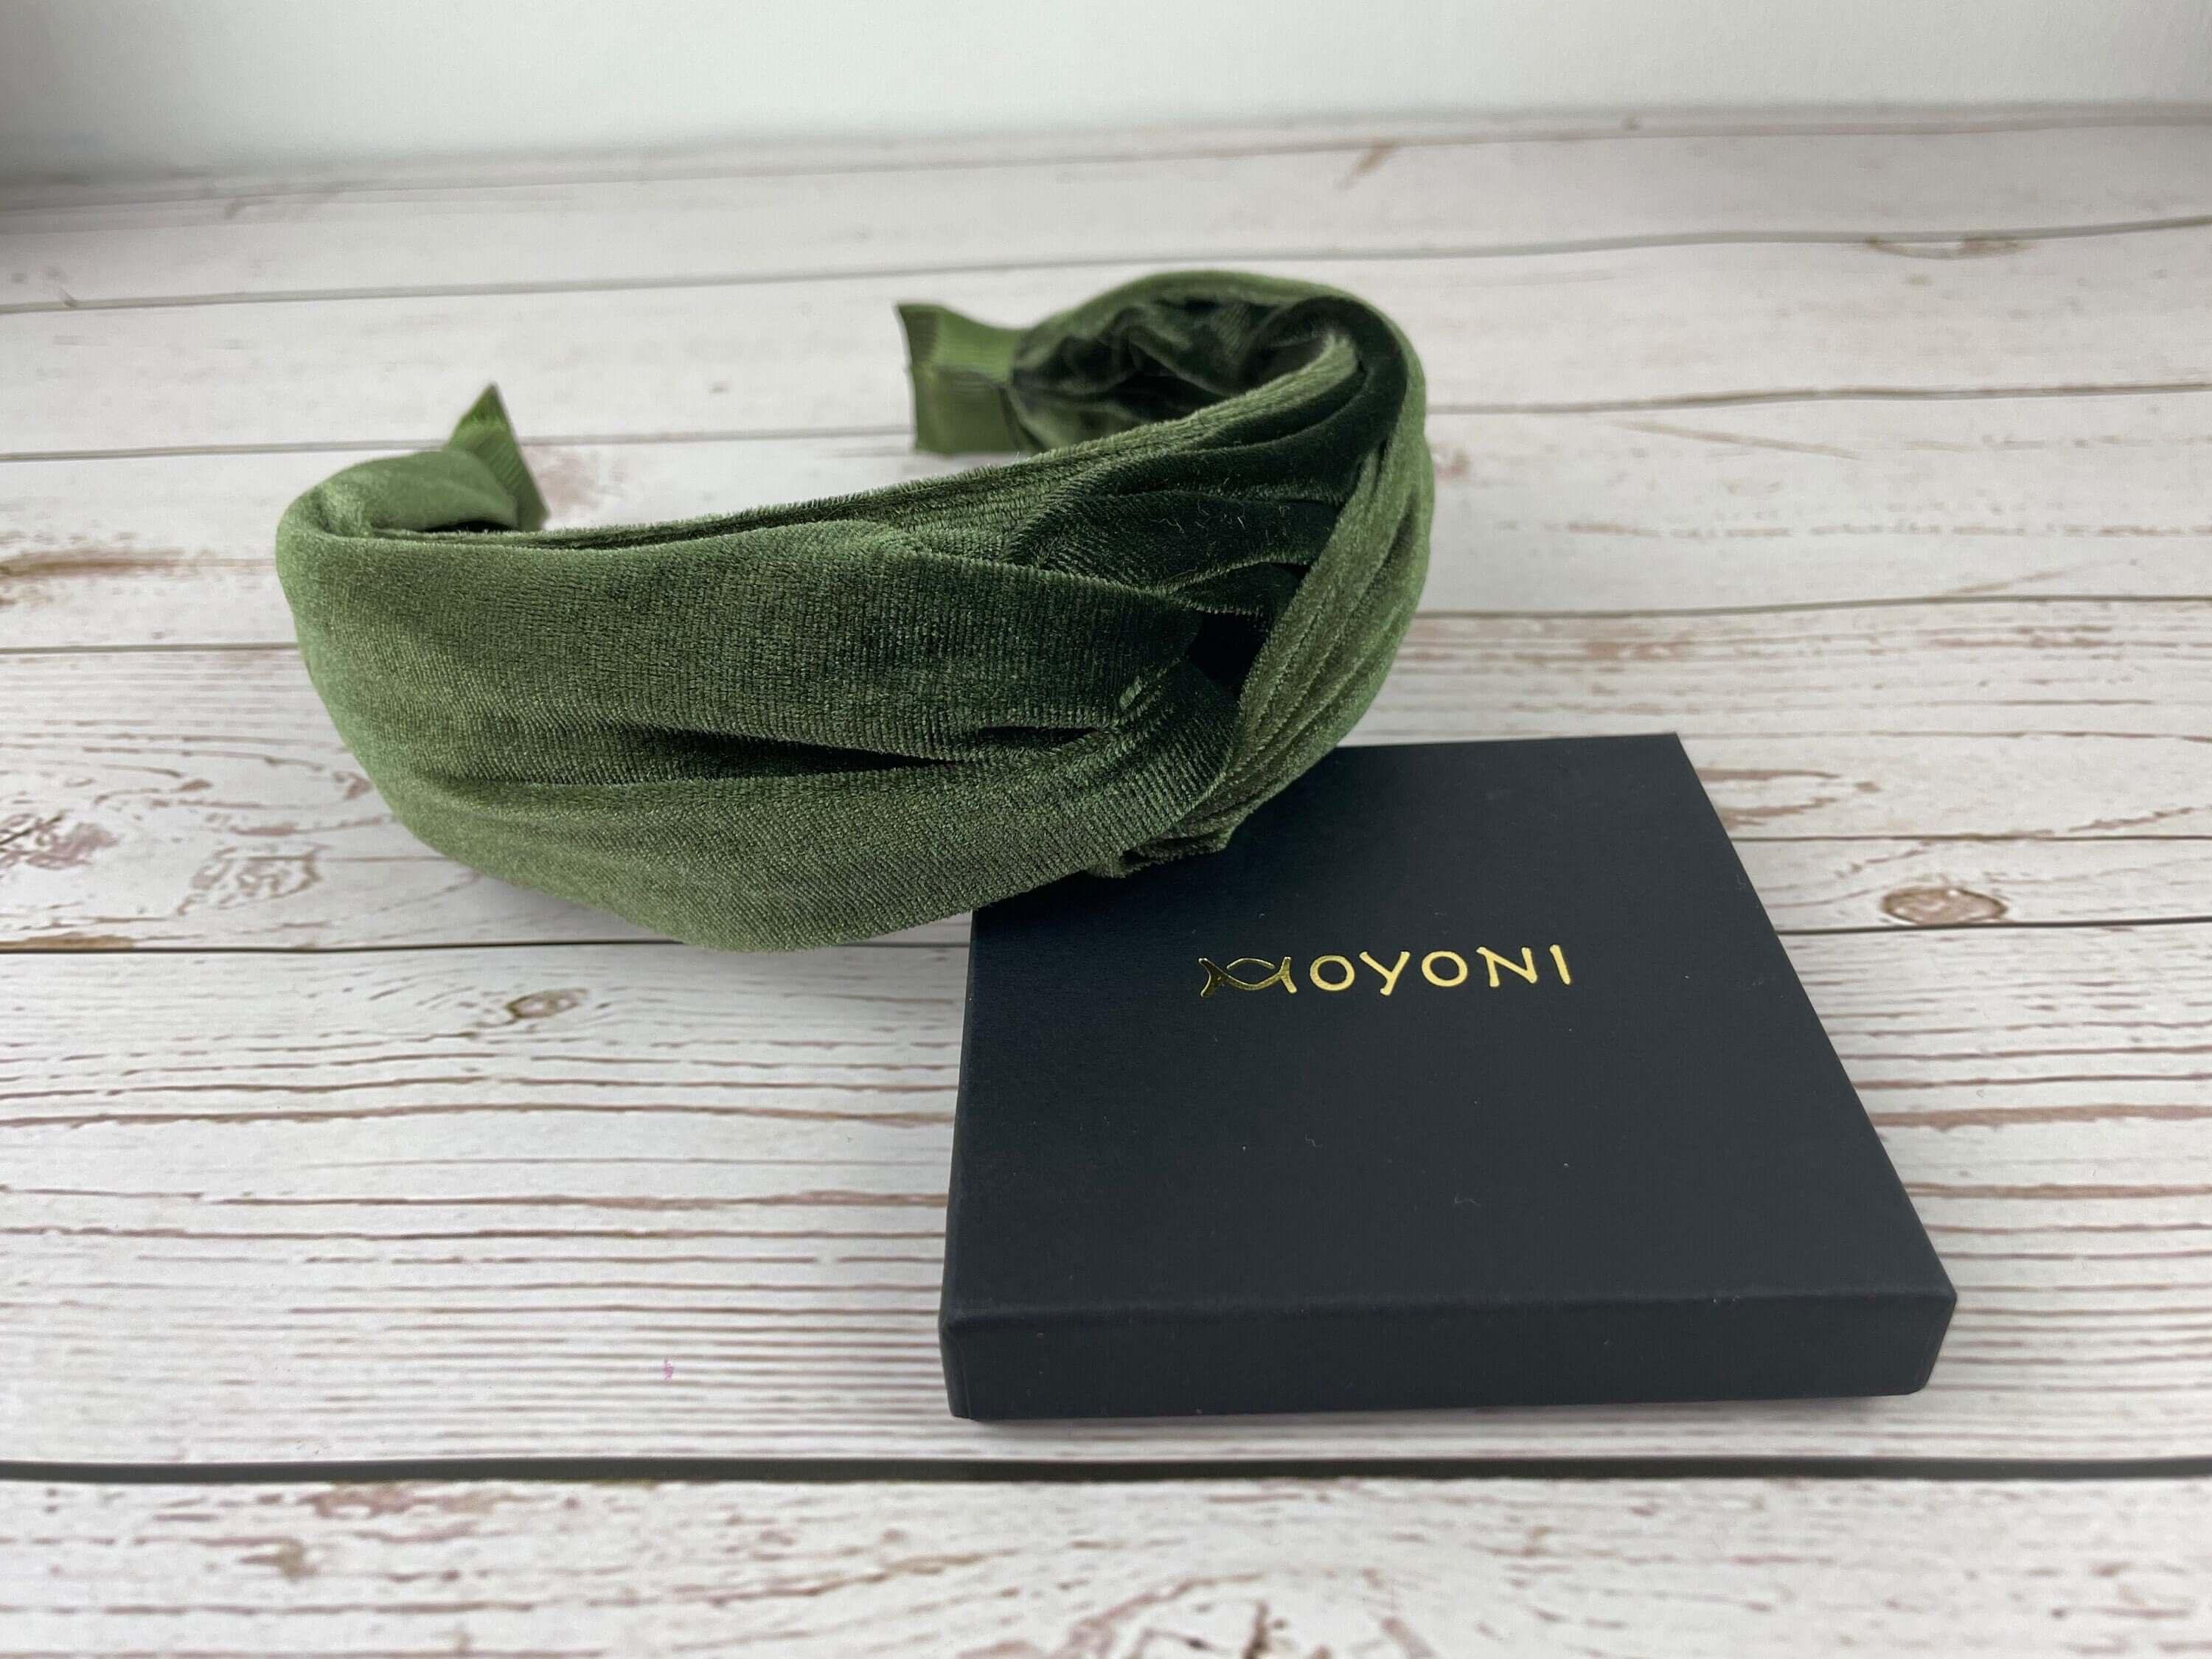 Elegant Army Green Knotted Velvet Headband, Stylish Women's Fashion Accessory, Braided Women's Hairband, Khaki Green without Padded Velvet Headband available at Moyoni Design